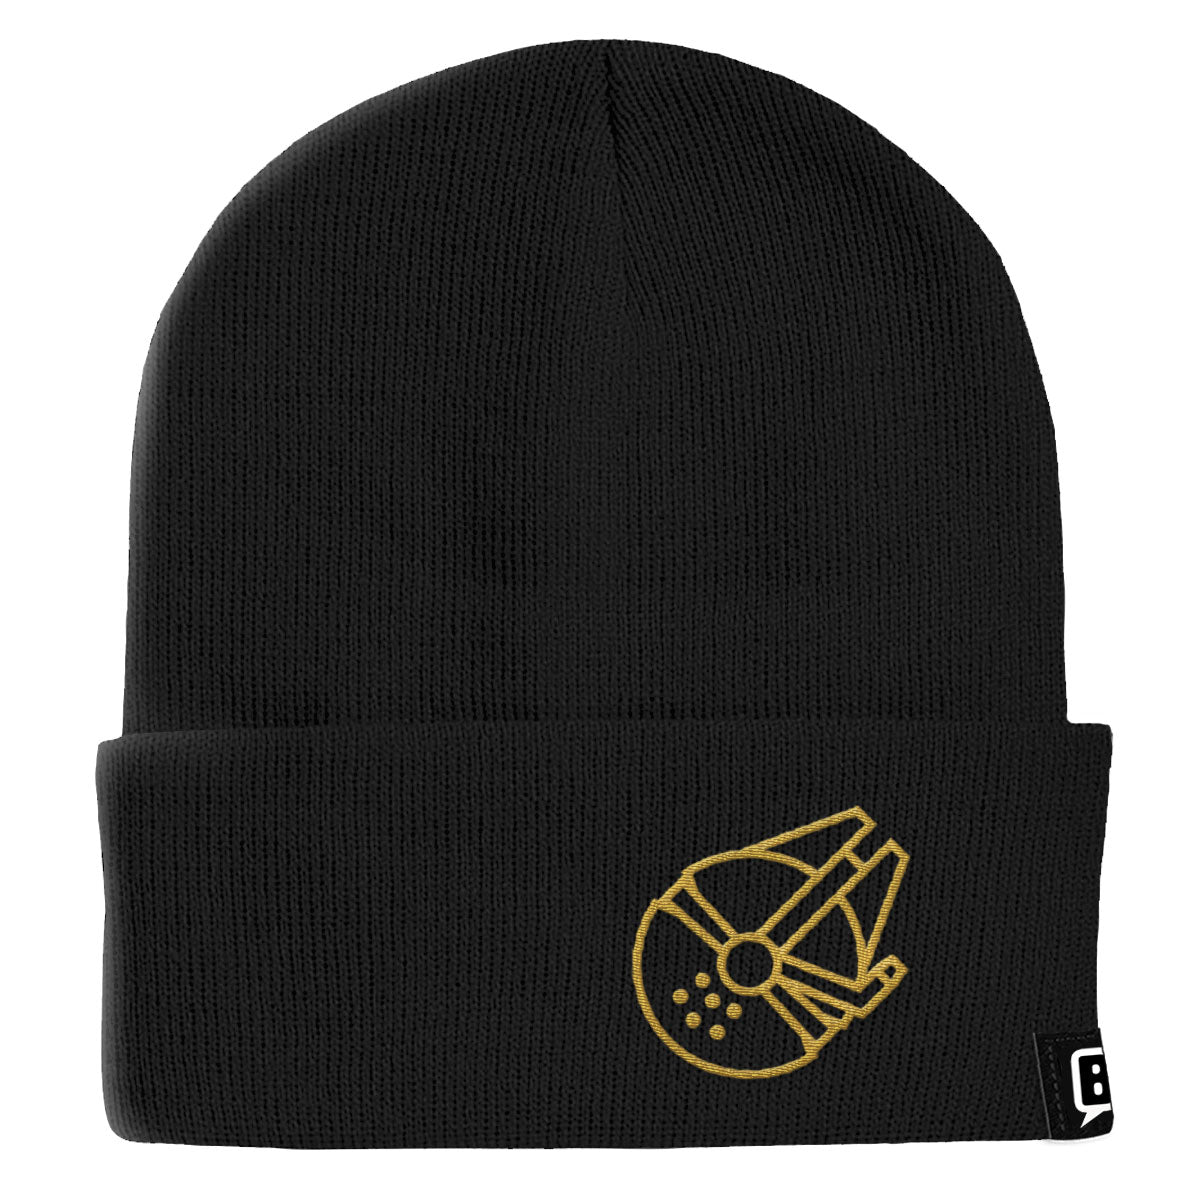 Falcon Beanies - BustedTees.com